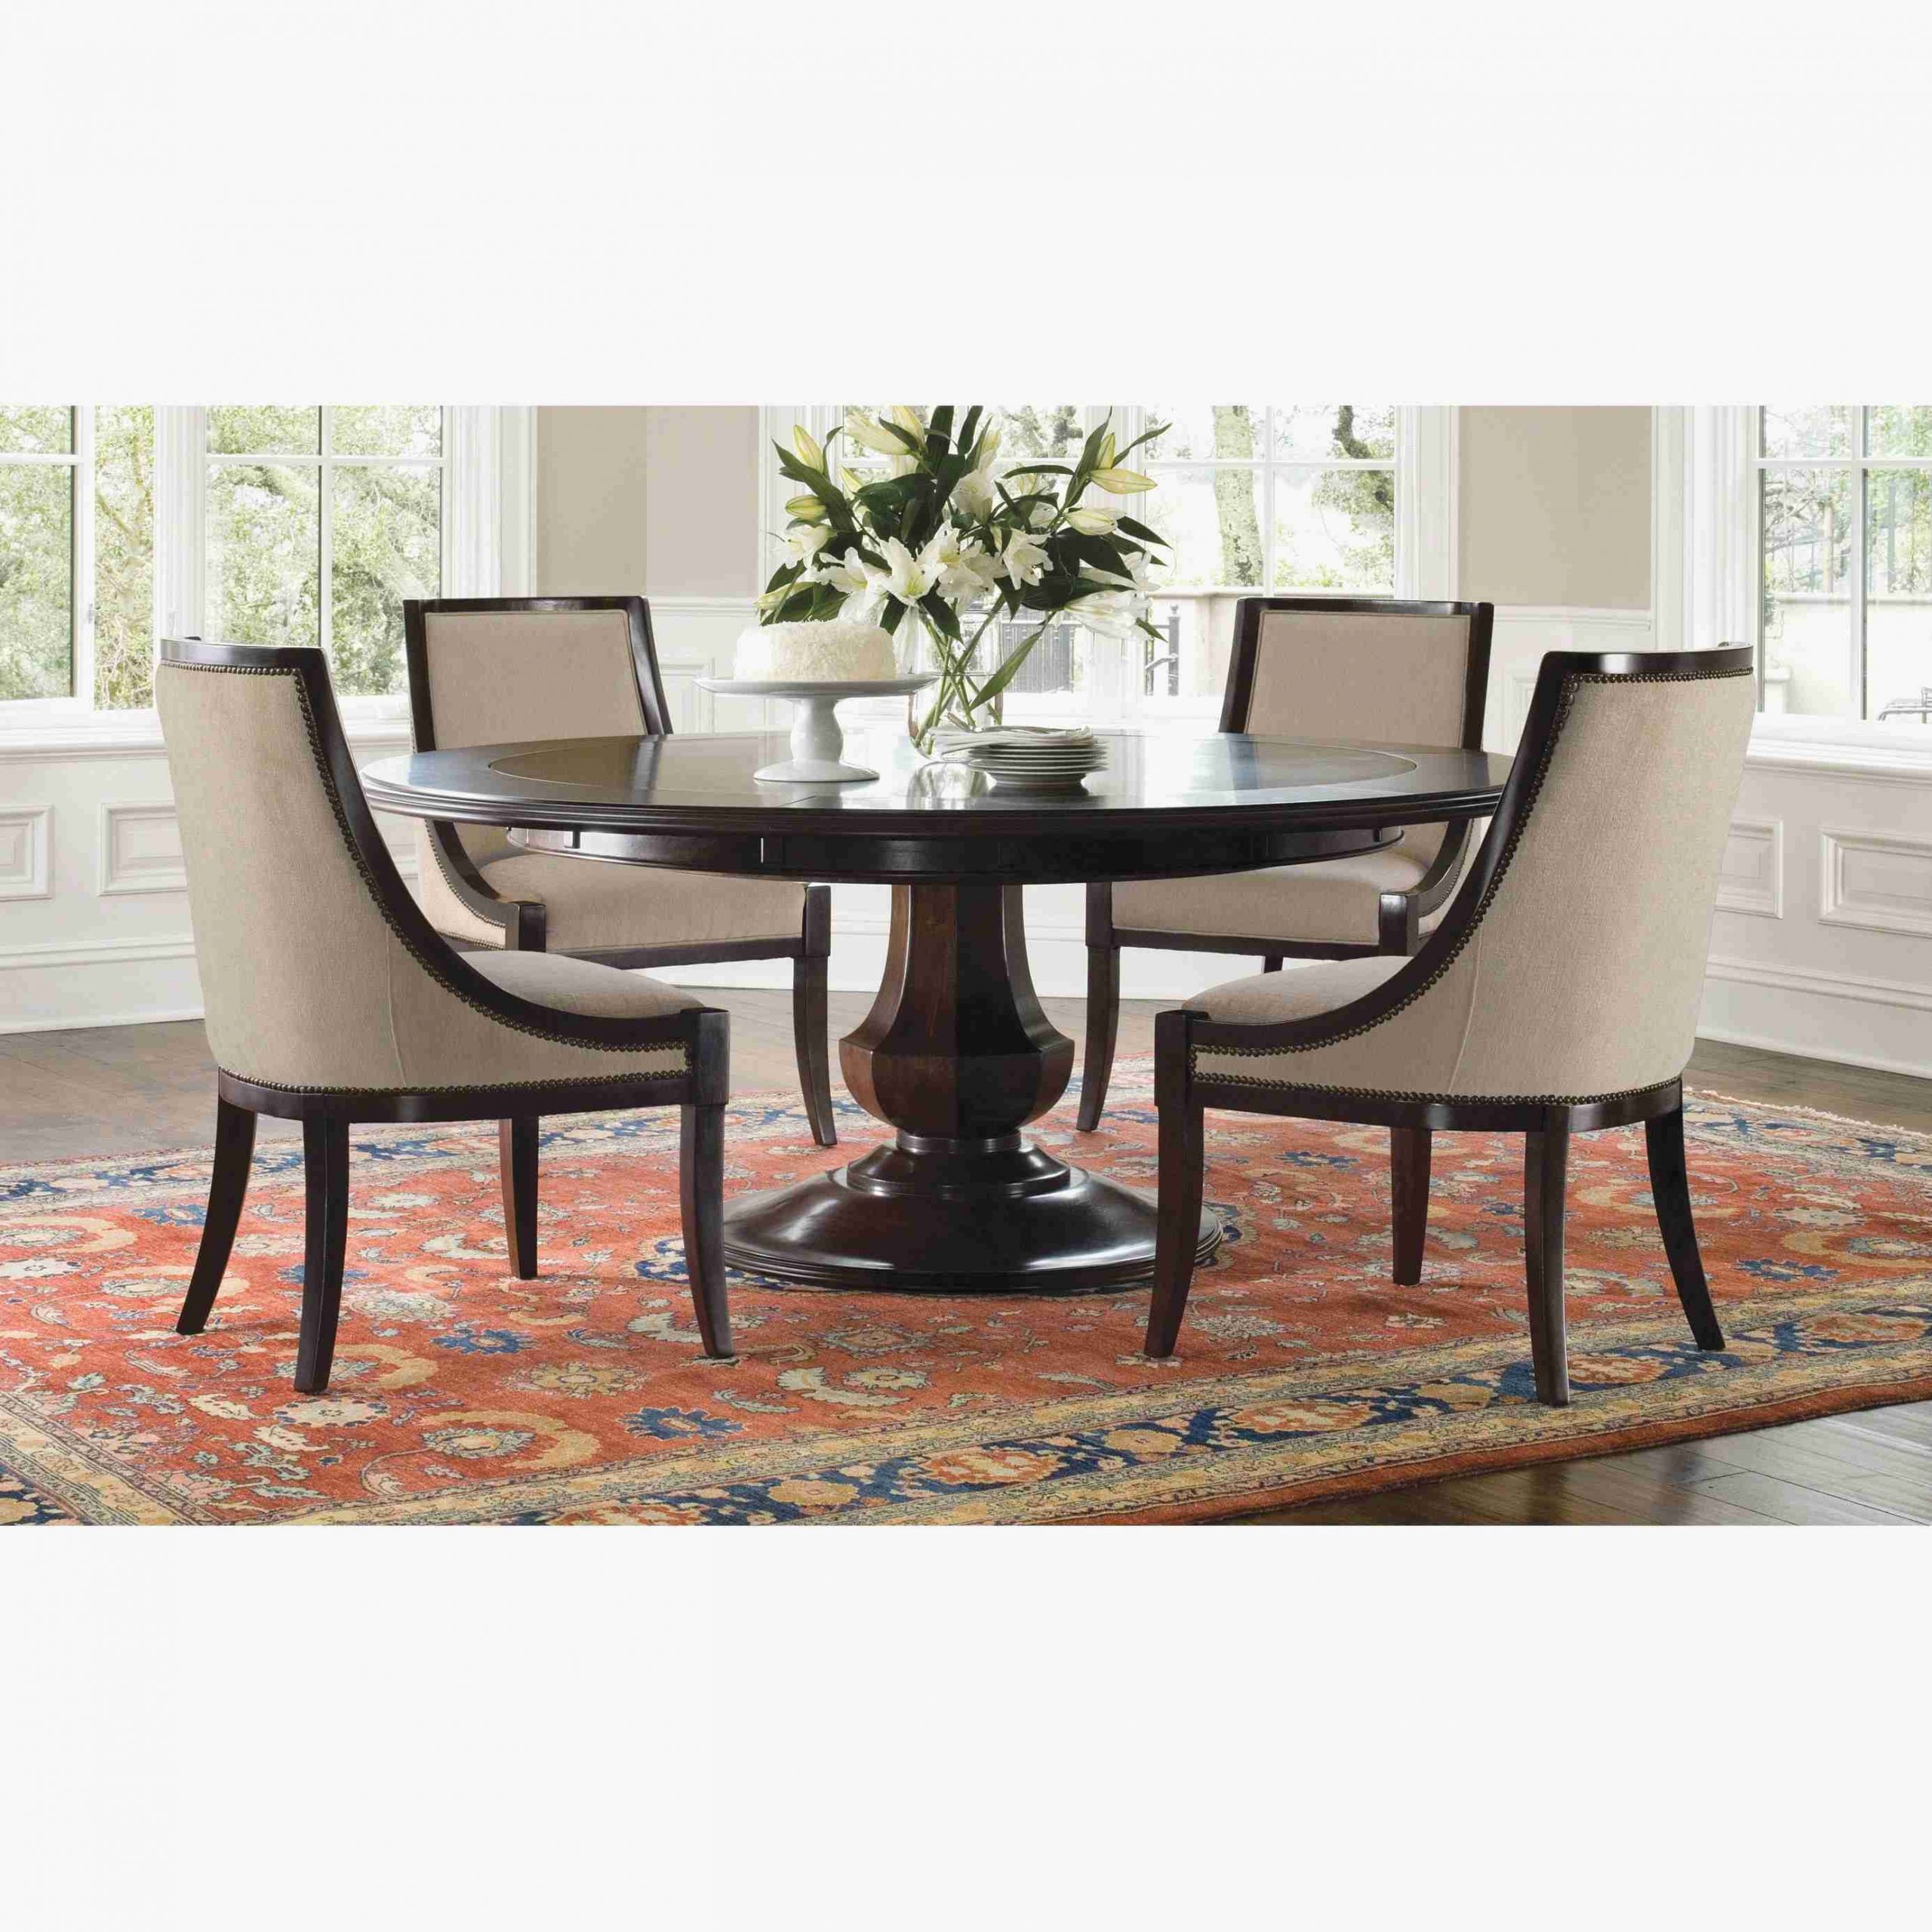 Dining Room Set Jcpenney  Faucet Ideas Site